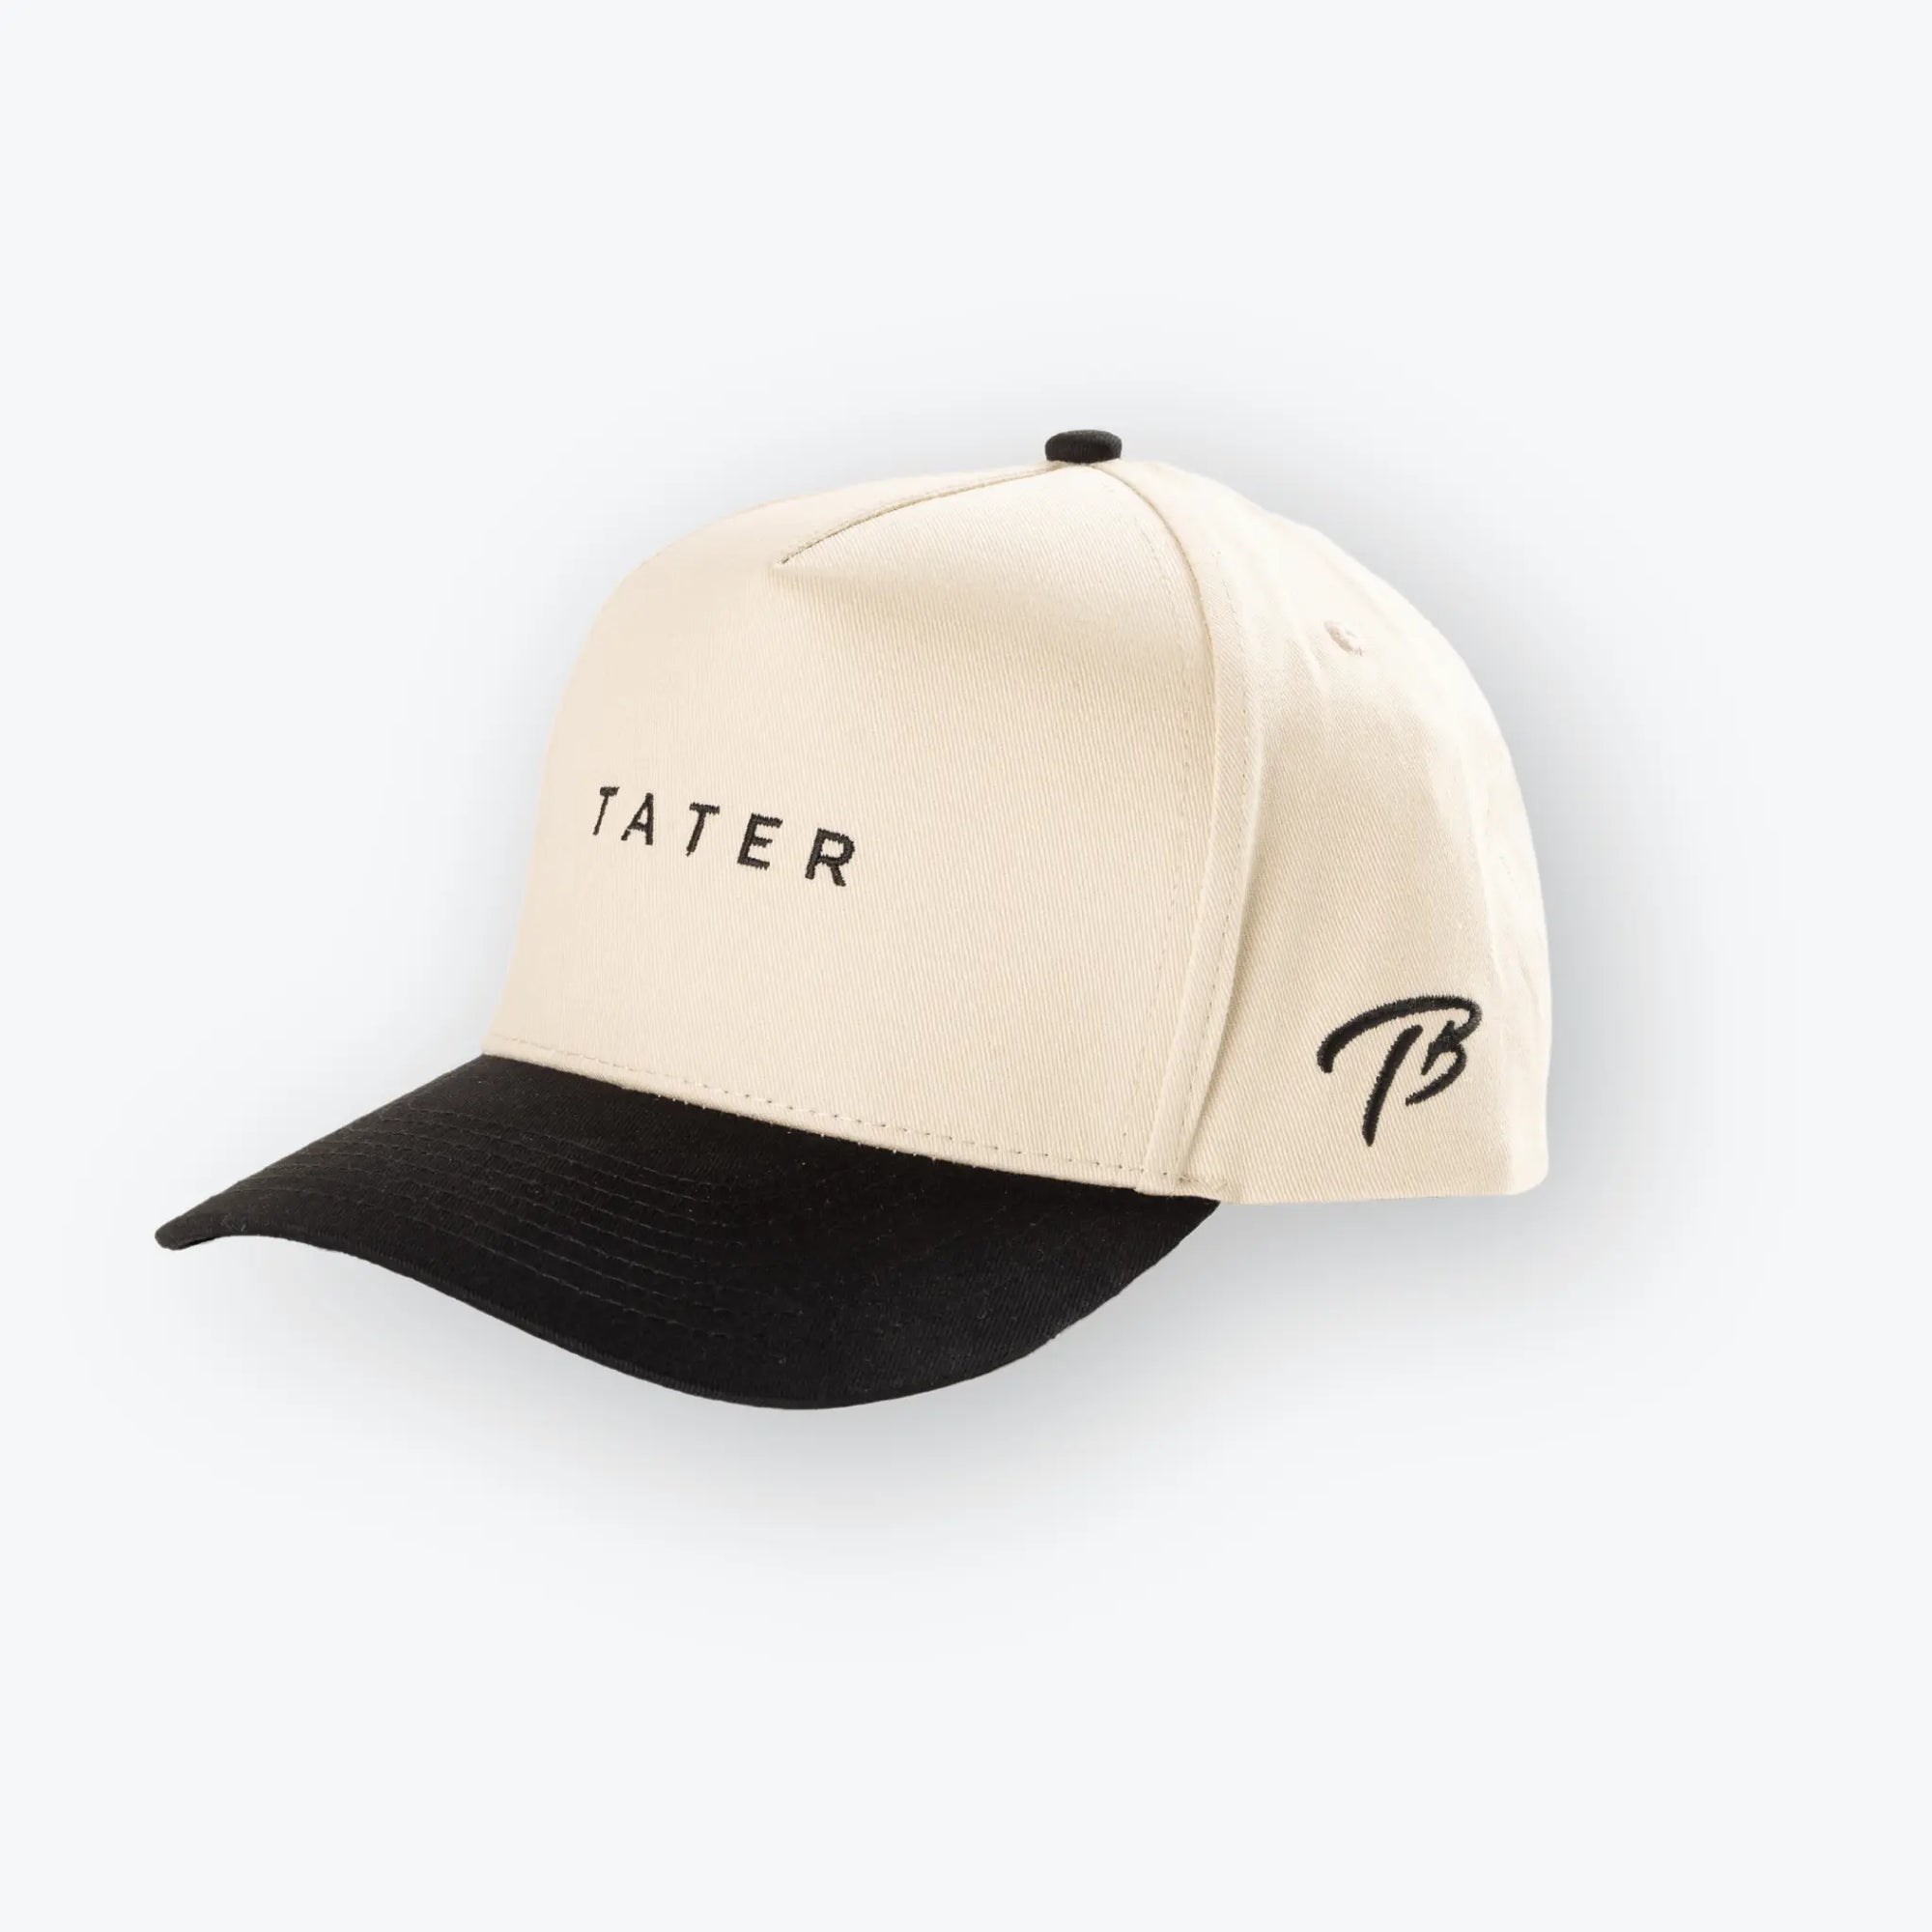 The image shows a tan and black snapback hat with the word "TATER" embroidered in black on the front. The Tater Baseball logo, a stylized "TB," is also embroidered on the side of the hat in black. The cap's design is simple yet stylish, aligning with the aesthetics of contemporary baseball lifestyle apparel.